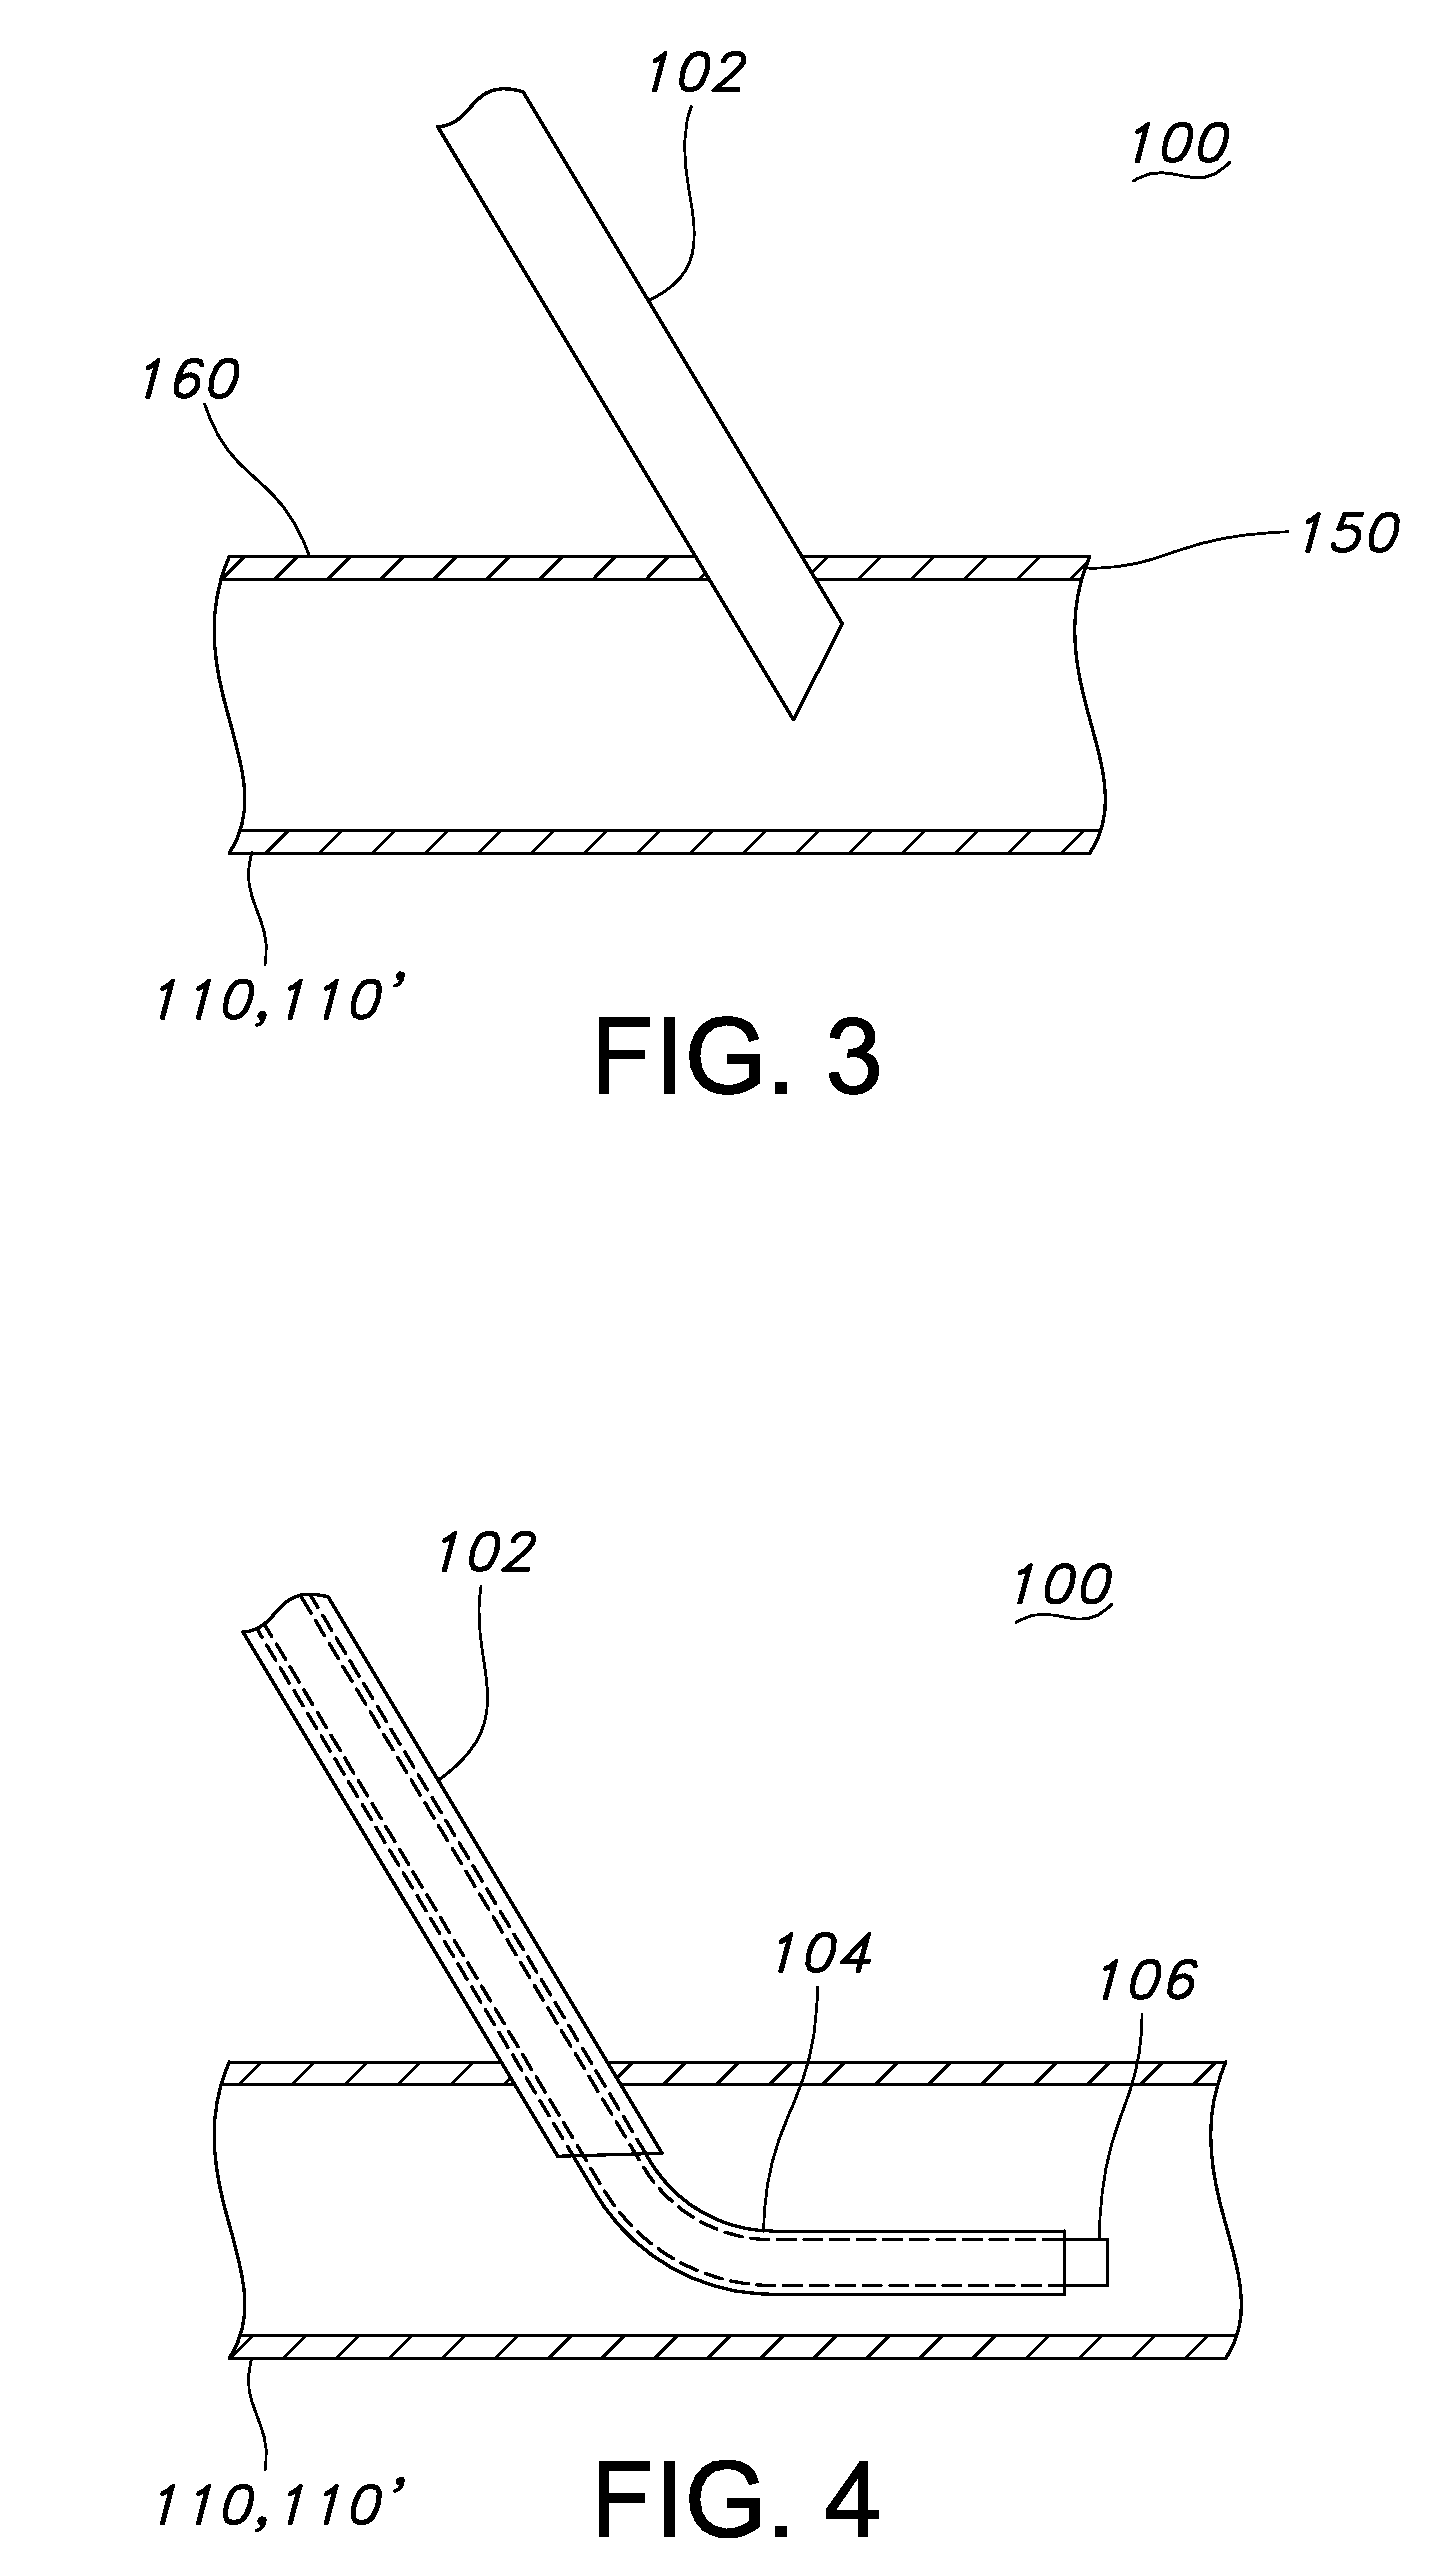 Expandable dialysis apparatus and method